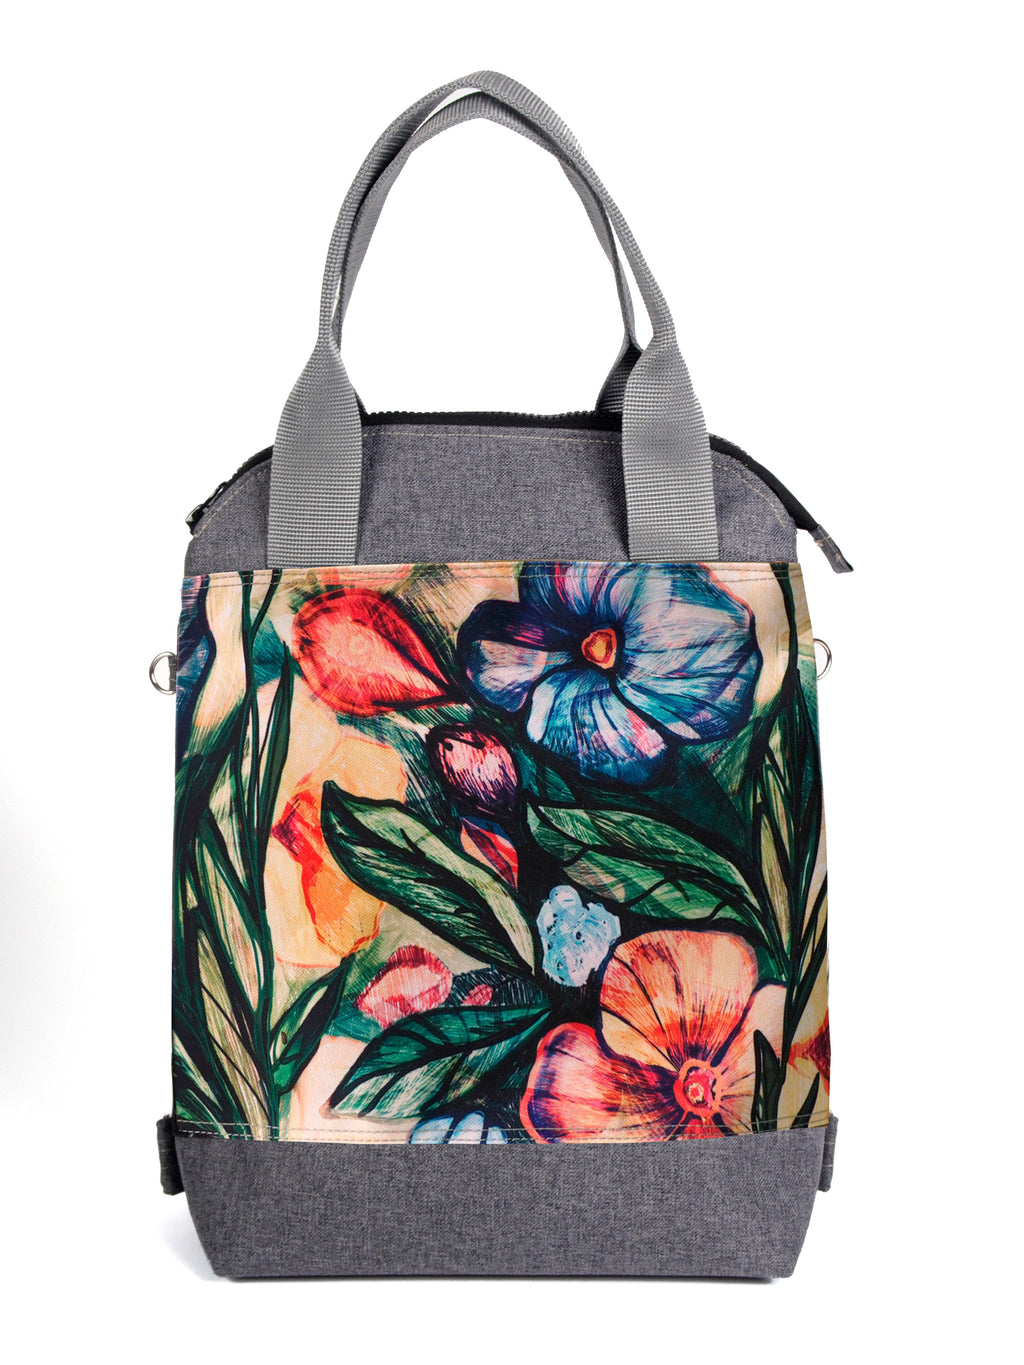 Bardo classic backpack textiles - Vintage garden - Premium Textiles from BARDO ART WORKS - Just lvabstract, floral, handemade, leaves, tablet, urban style, woman, work bag89.00! Shop now at BARDO ART WORKS